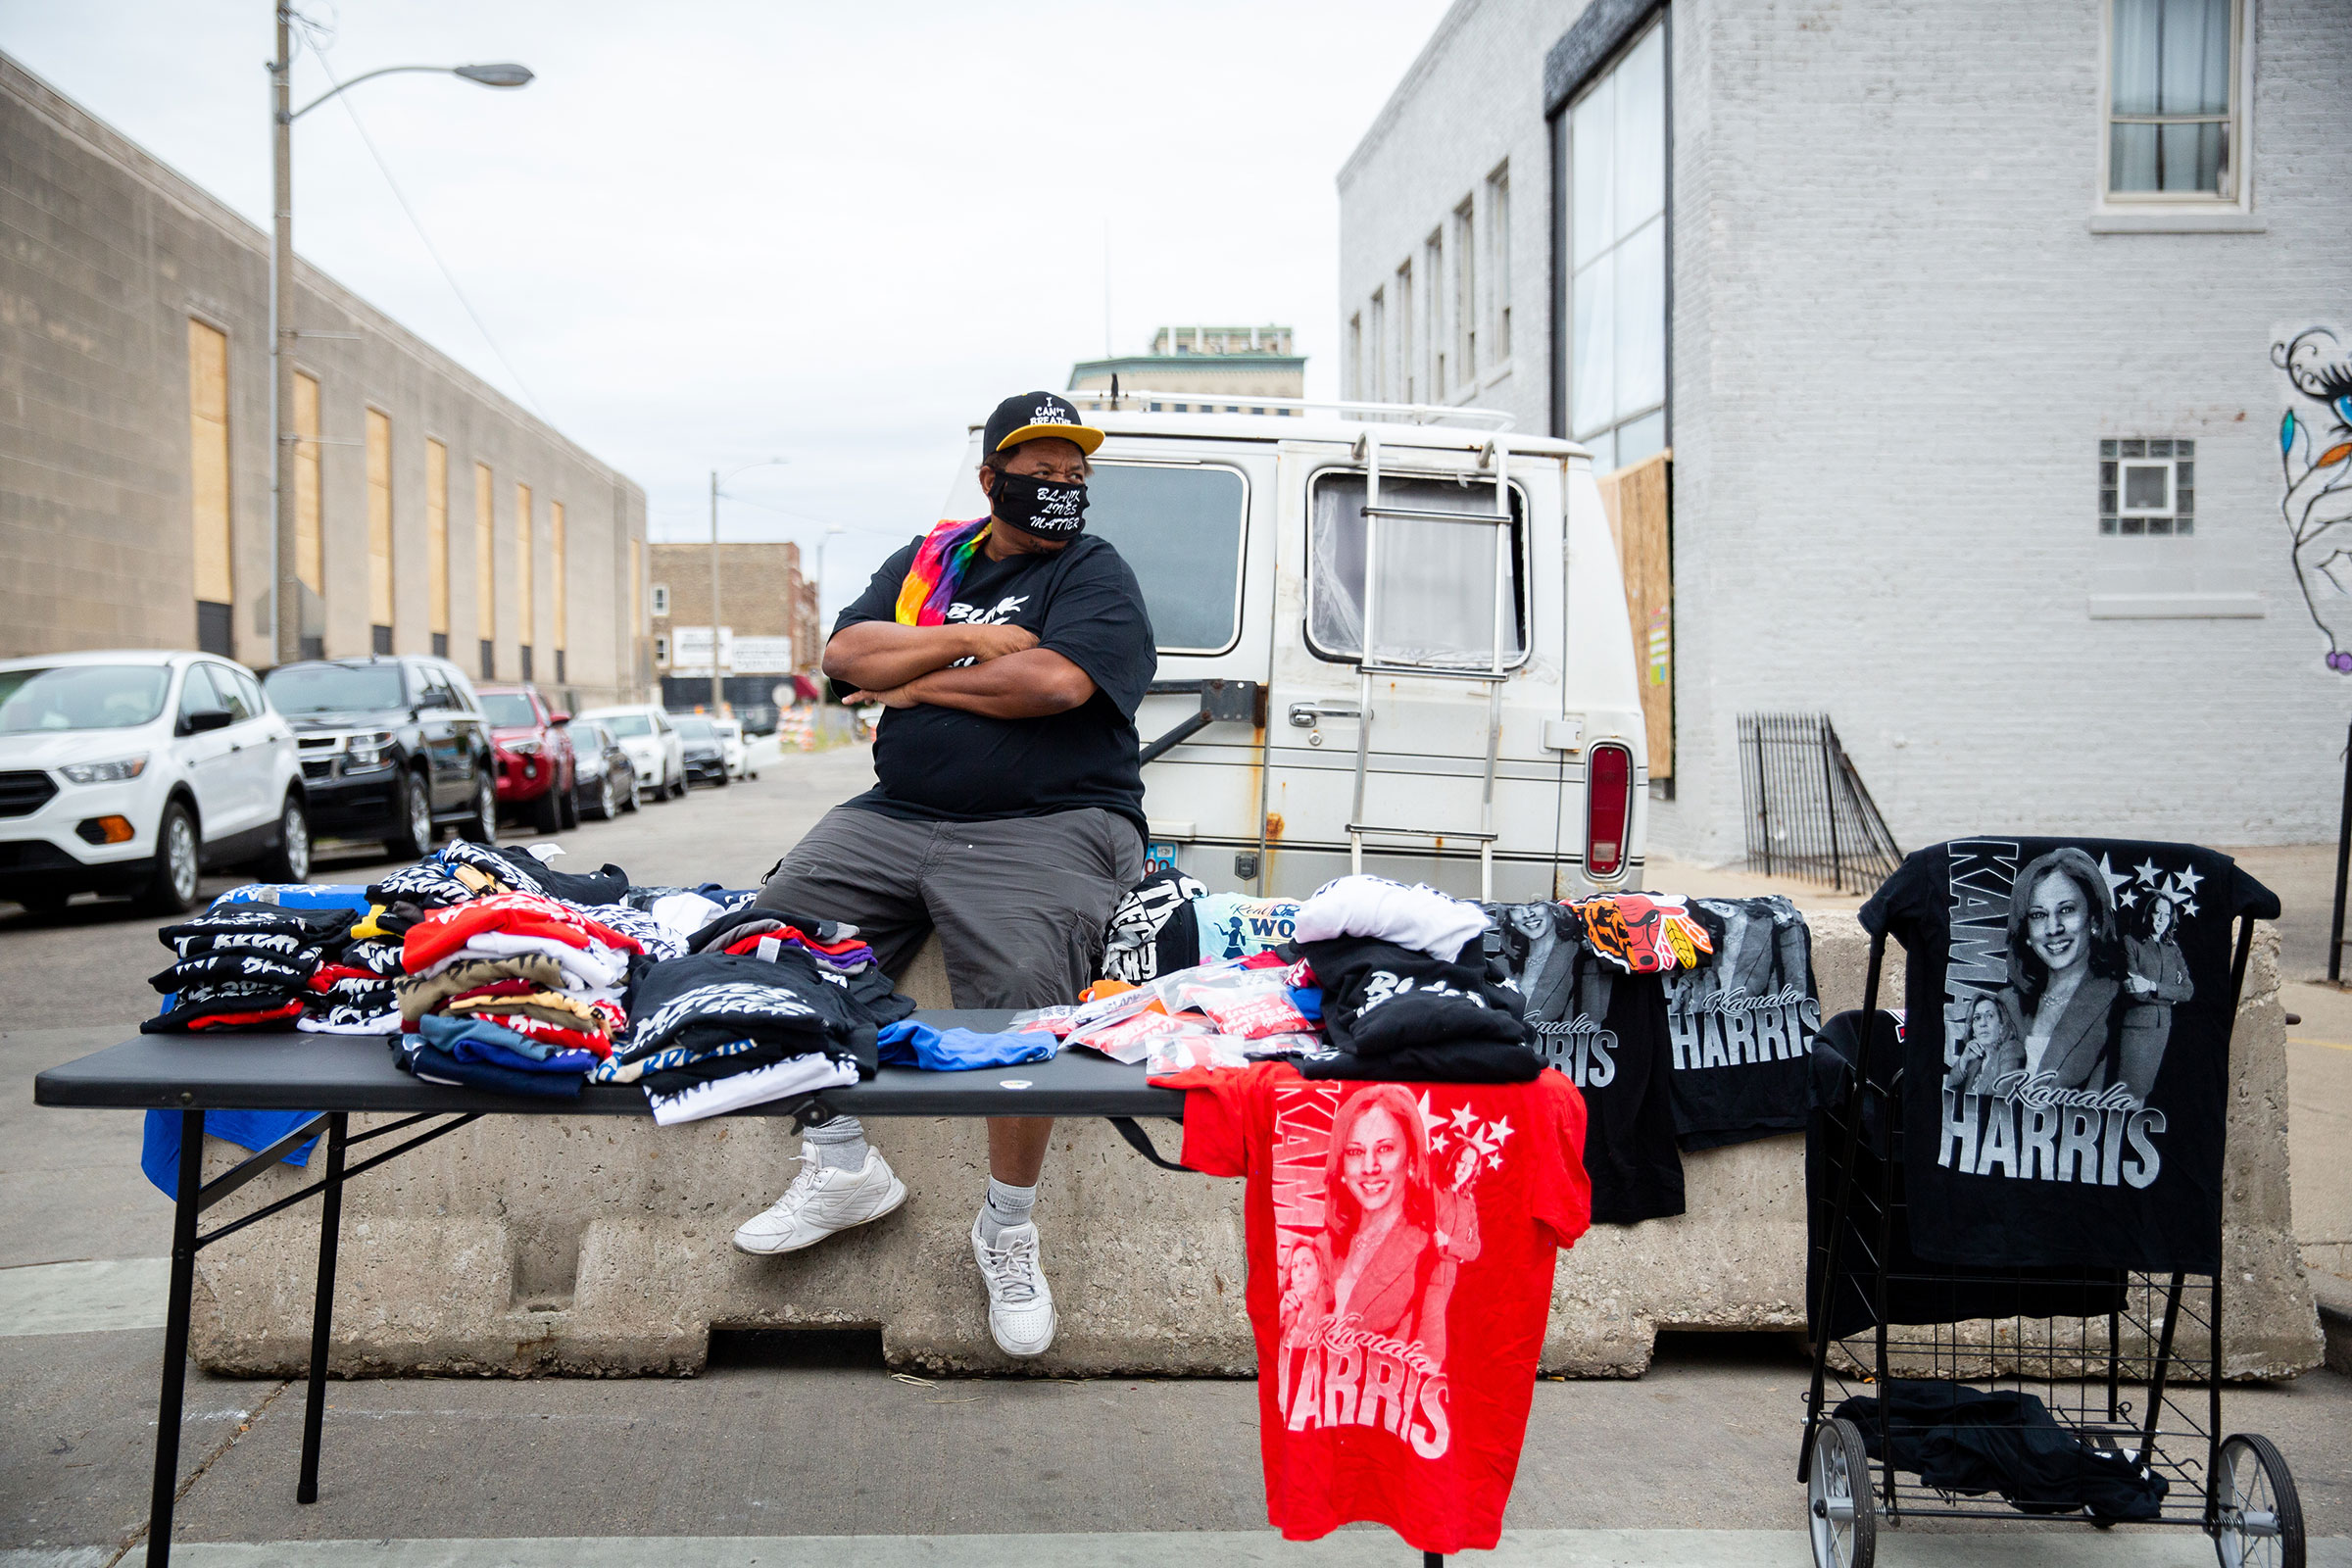 A street vendor selling T-shirts observes a crowd of protesters marching near the county courthouse in Kenosha, Wis., on Sept. 1, 2020. (Patience Zalanga for TIME)